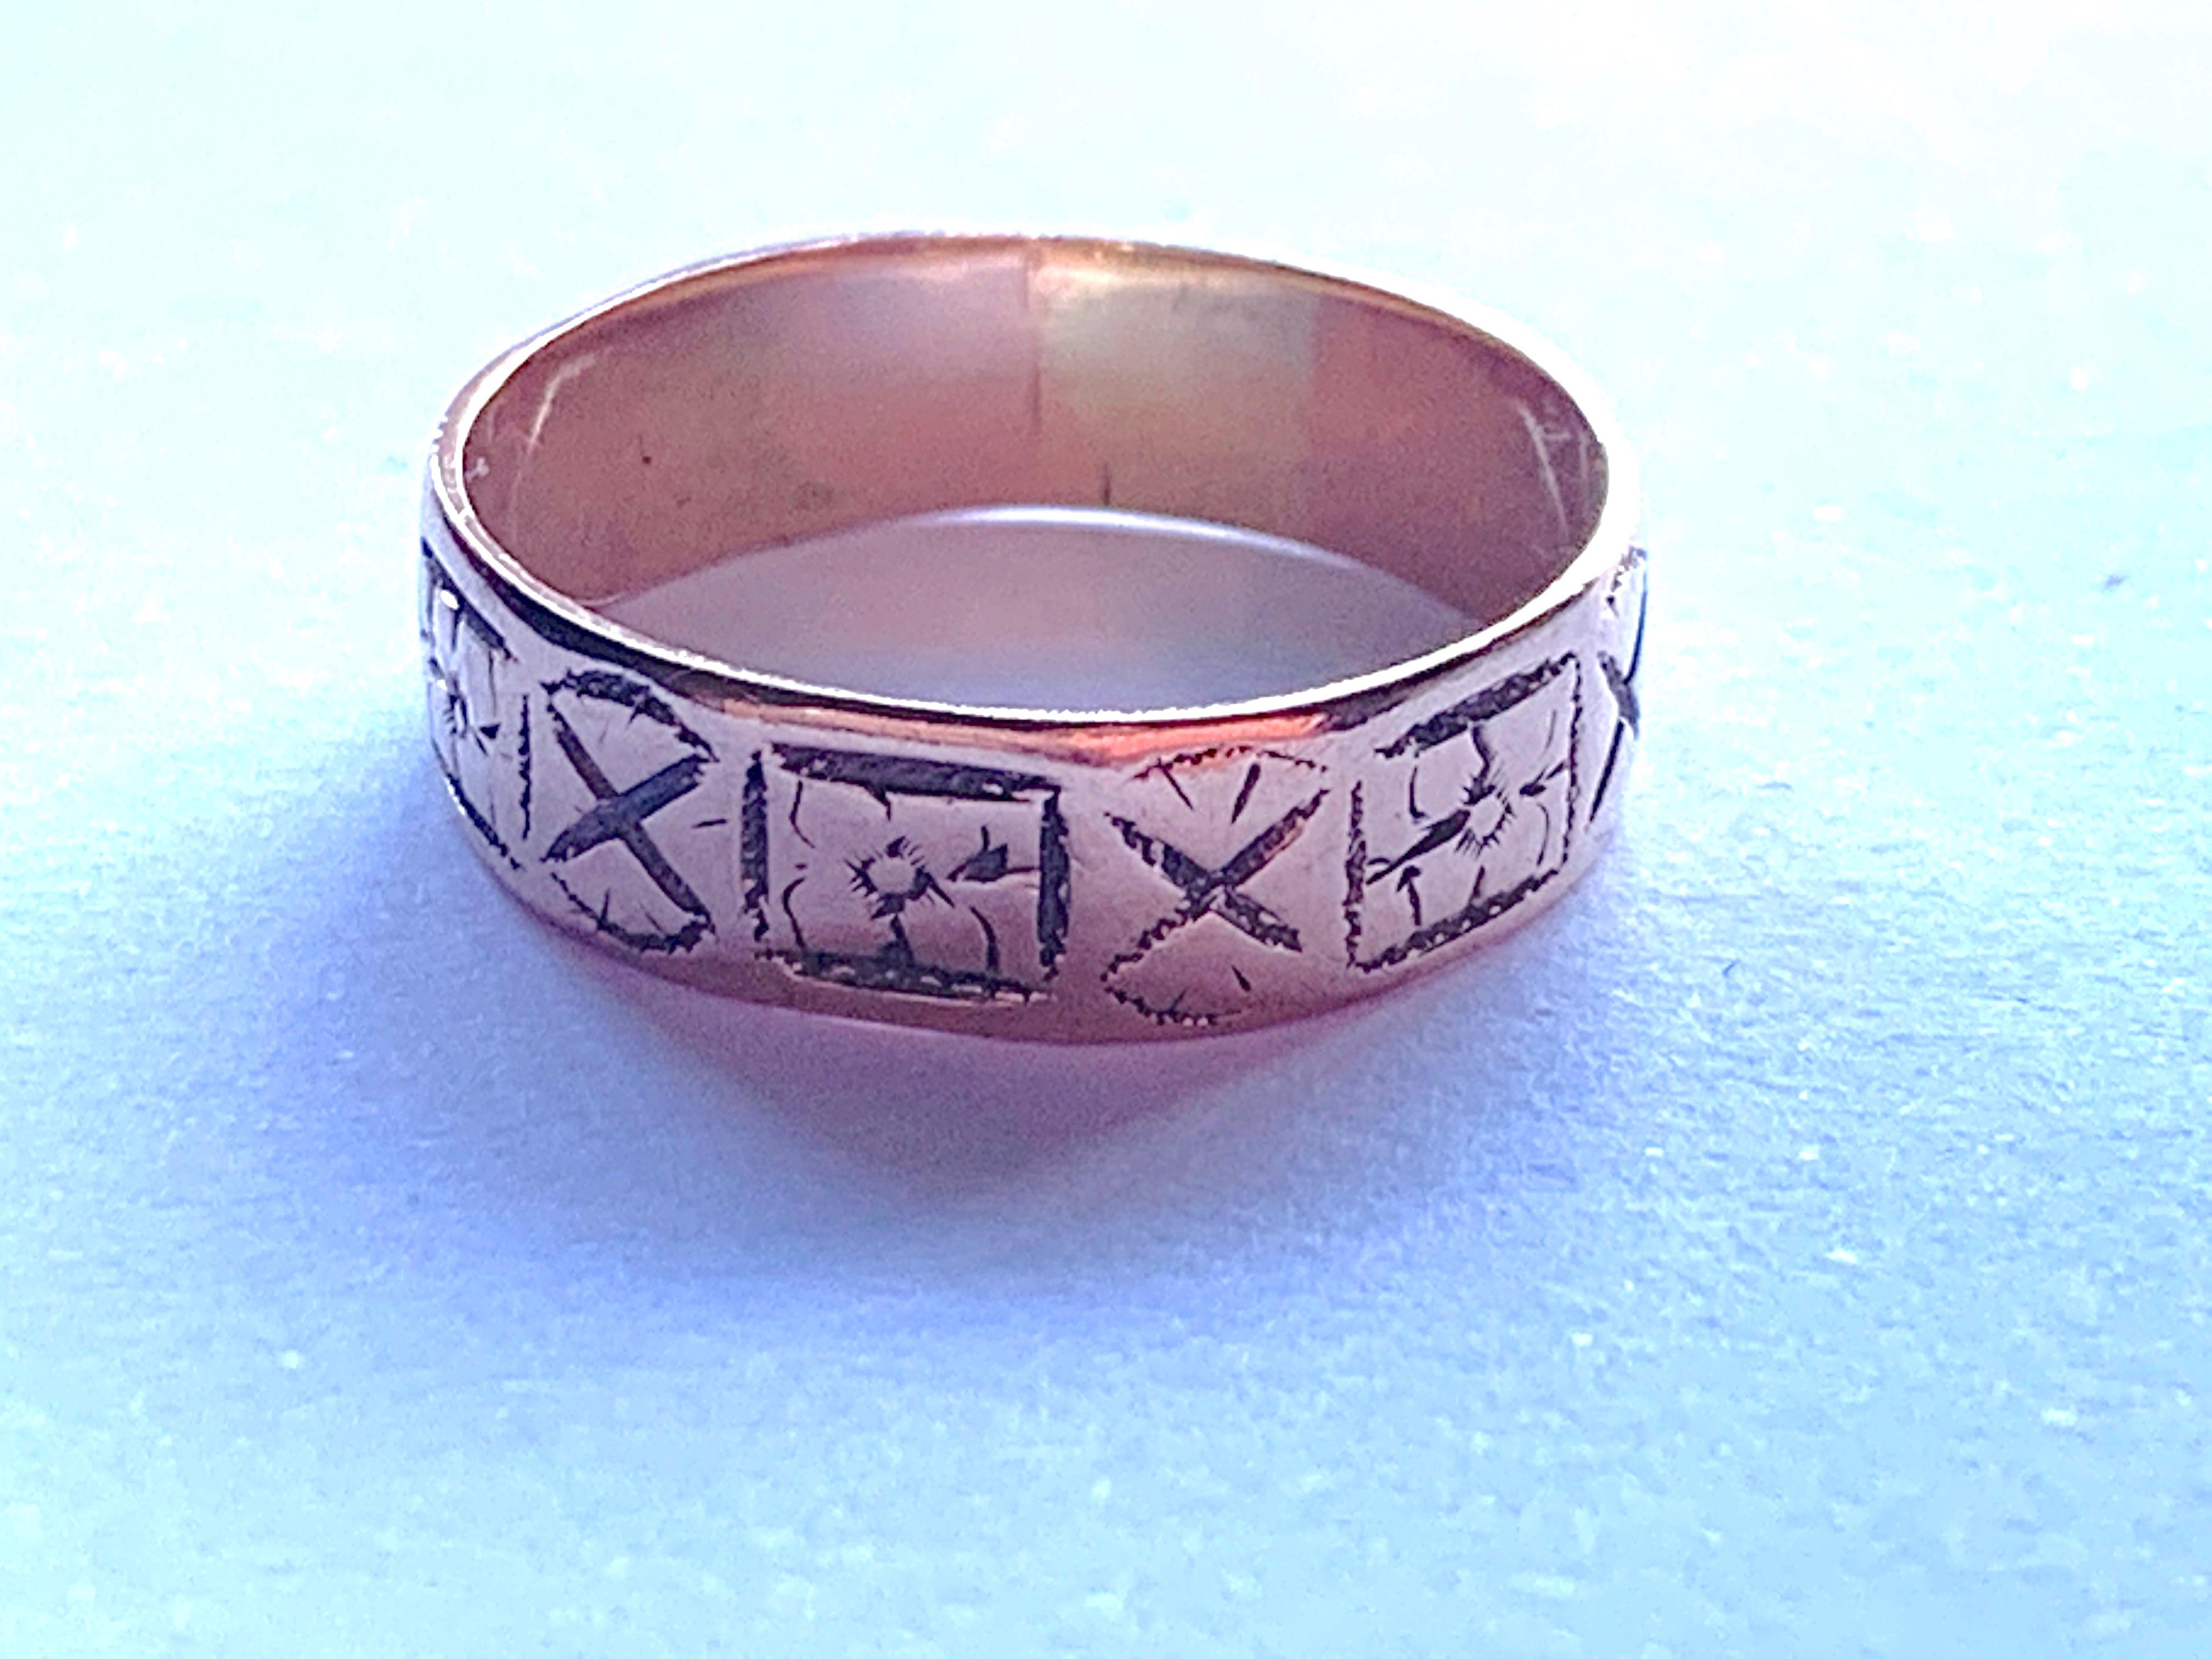 18ct Rose Gold Ring 
Antique Victorian Hand etched design 
Fully Hallmarked Dated 1881
By S.Brothers 
Size U.S 6 1/2
        U.K N
